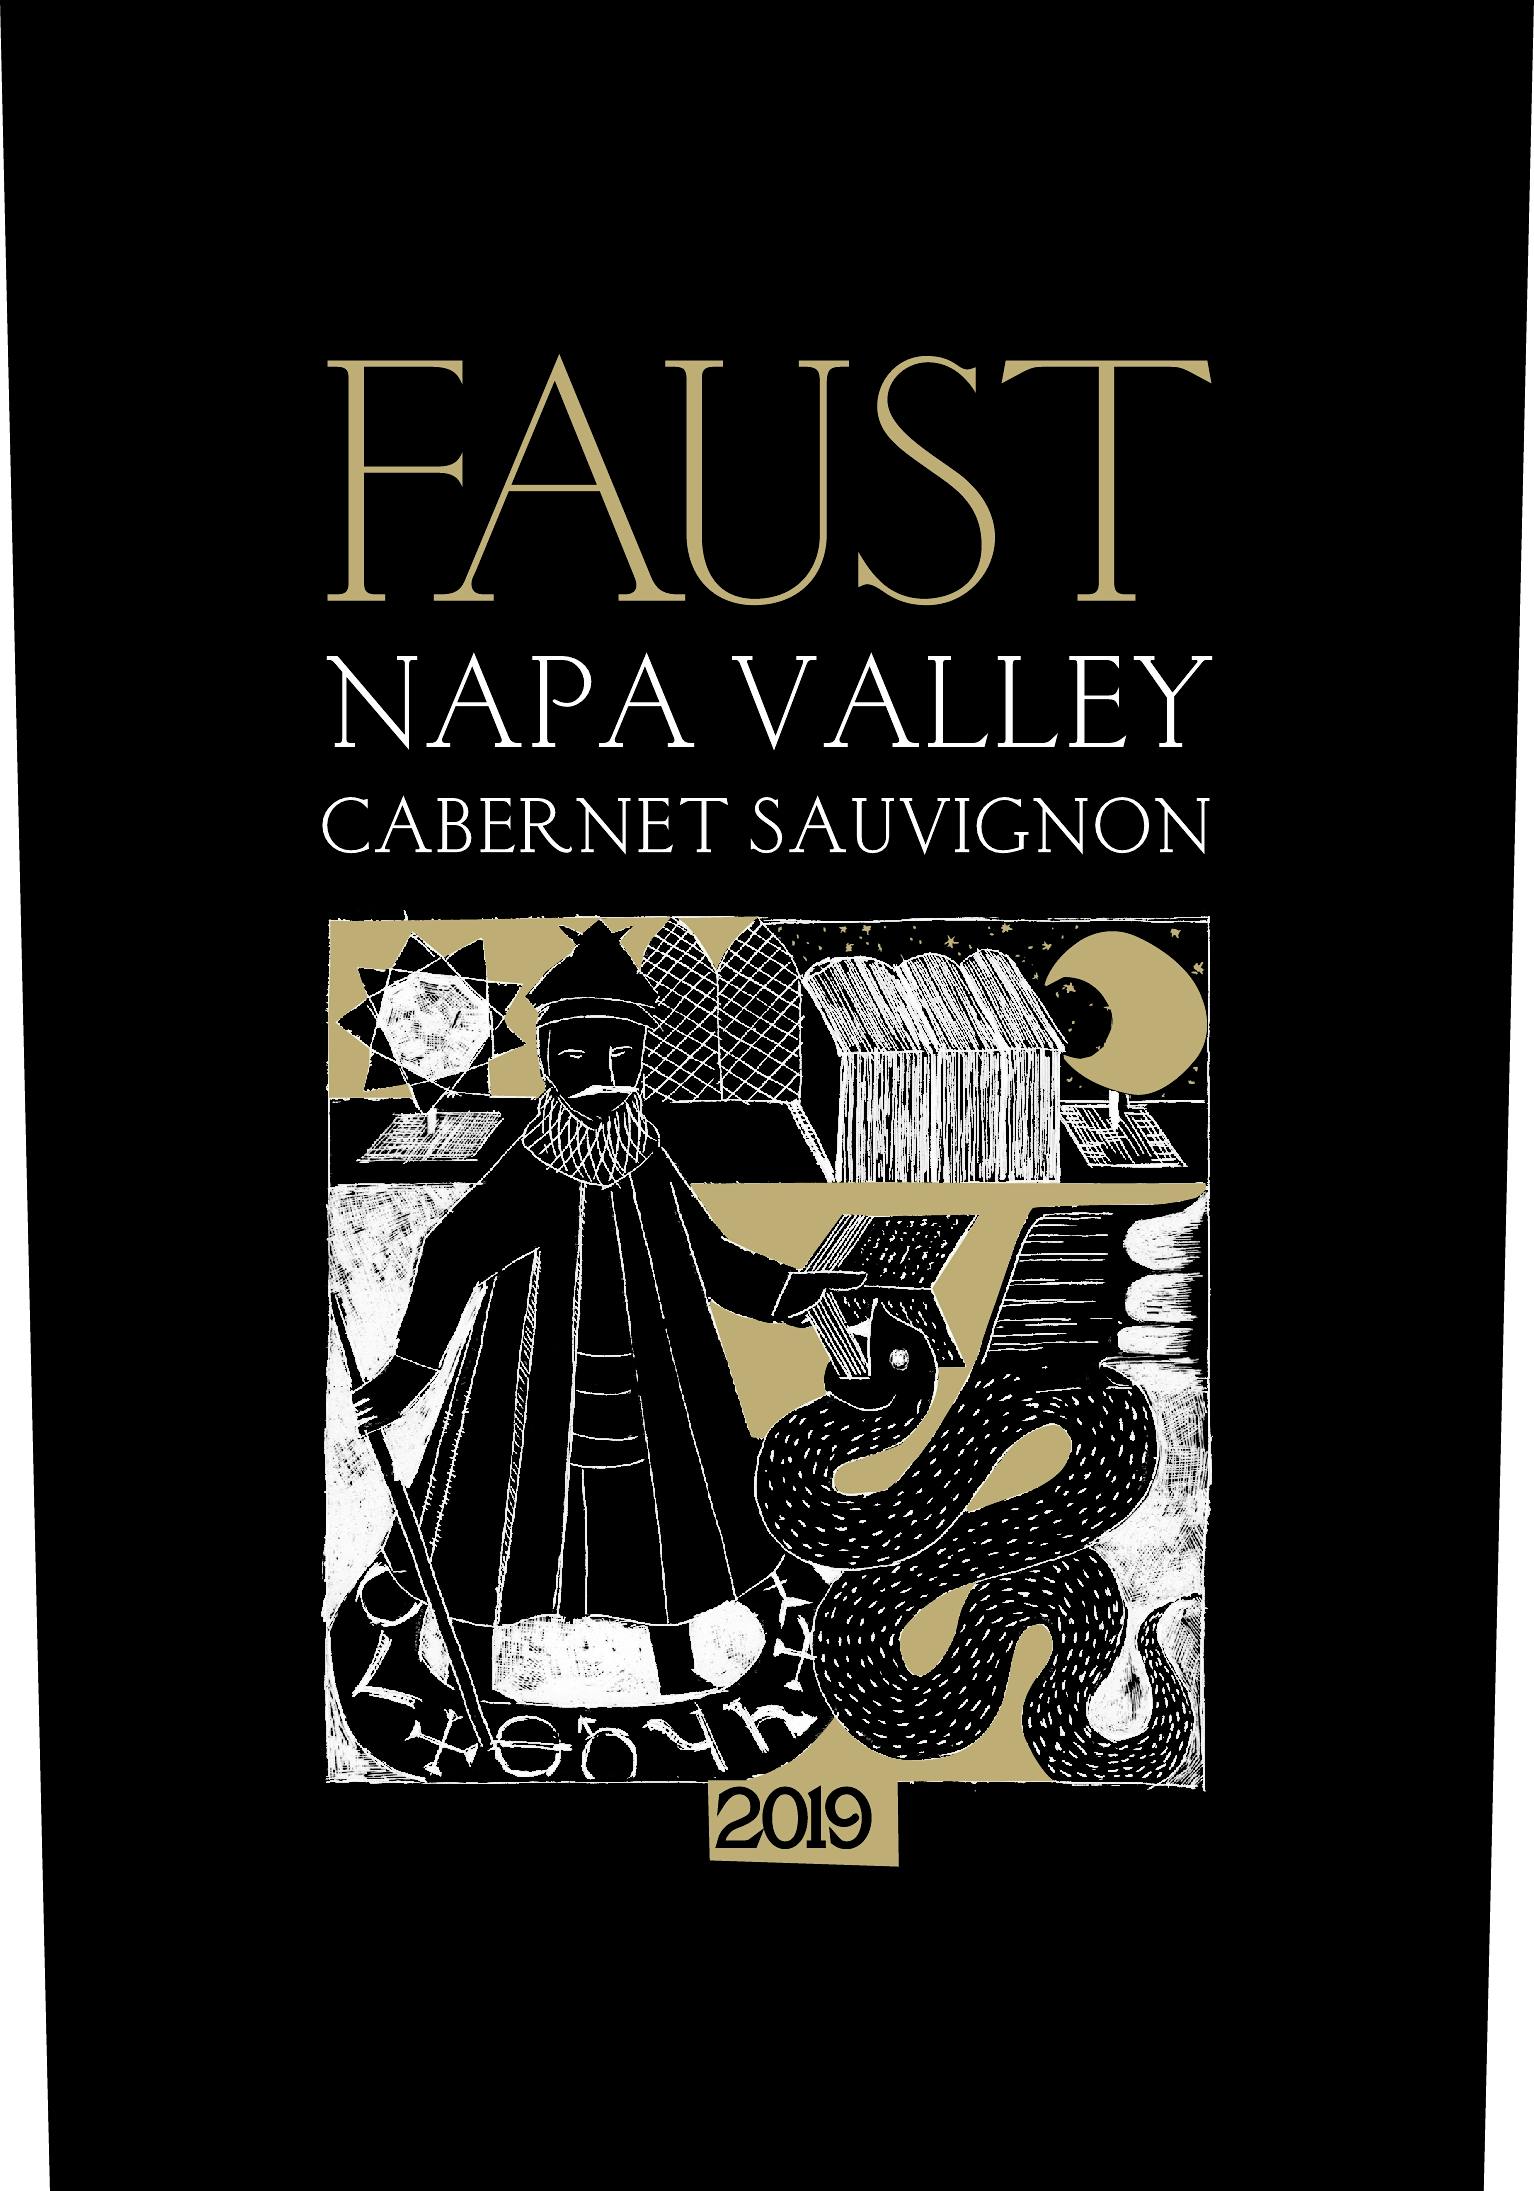 Label for Faust